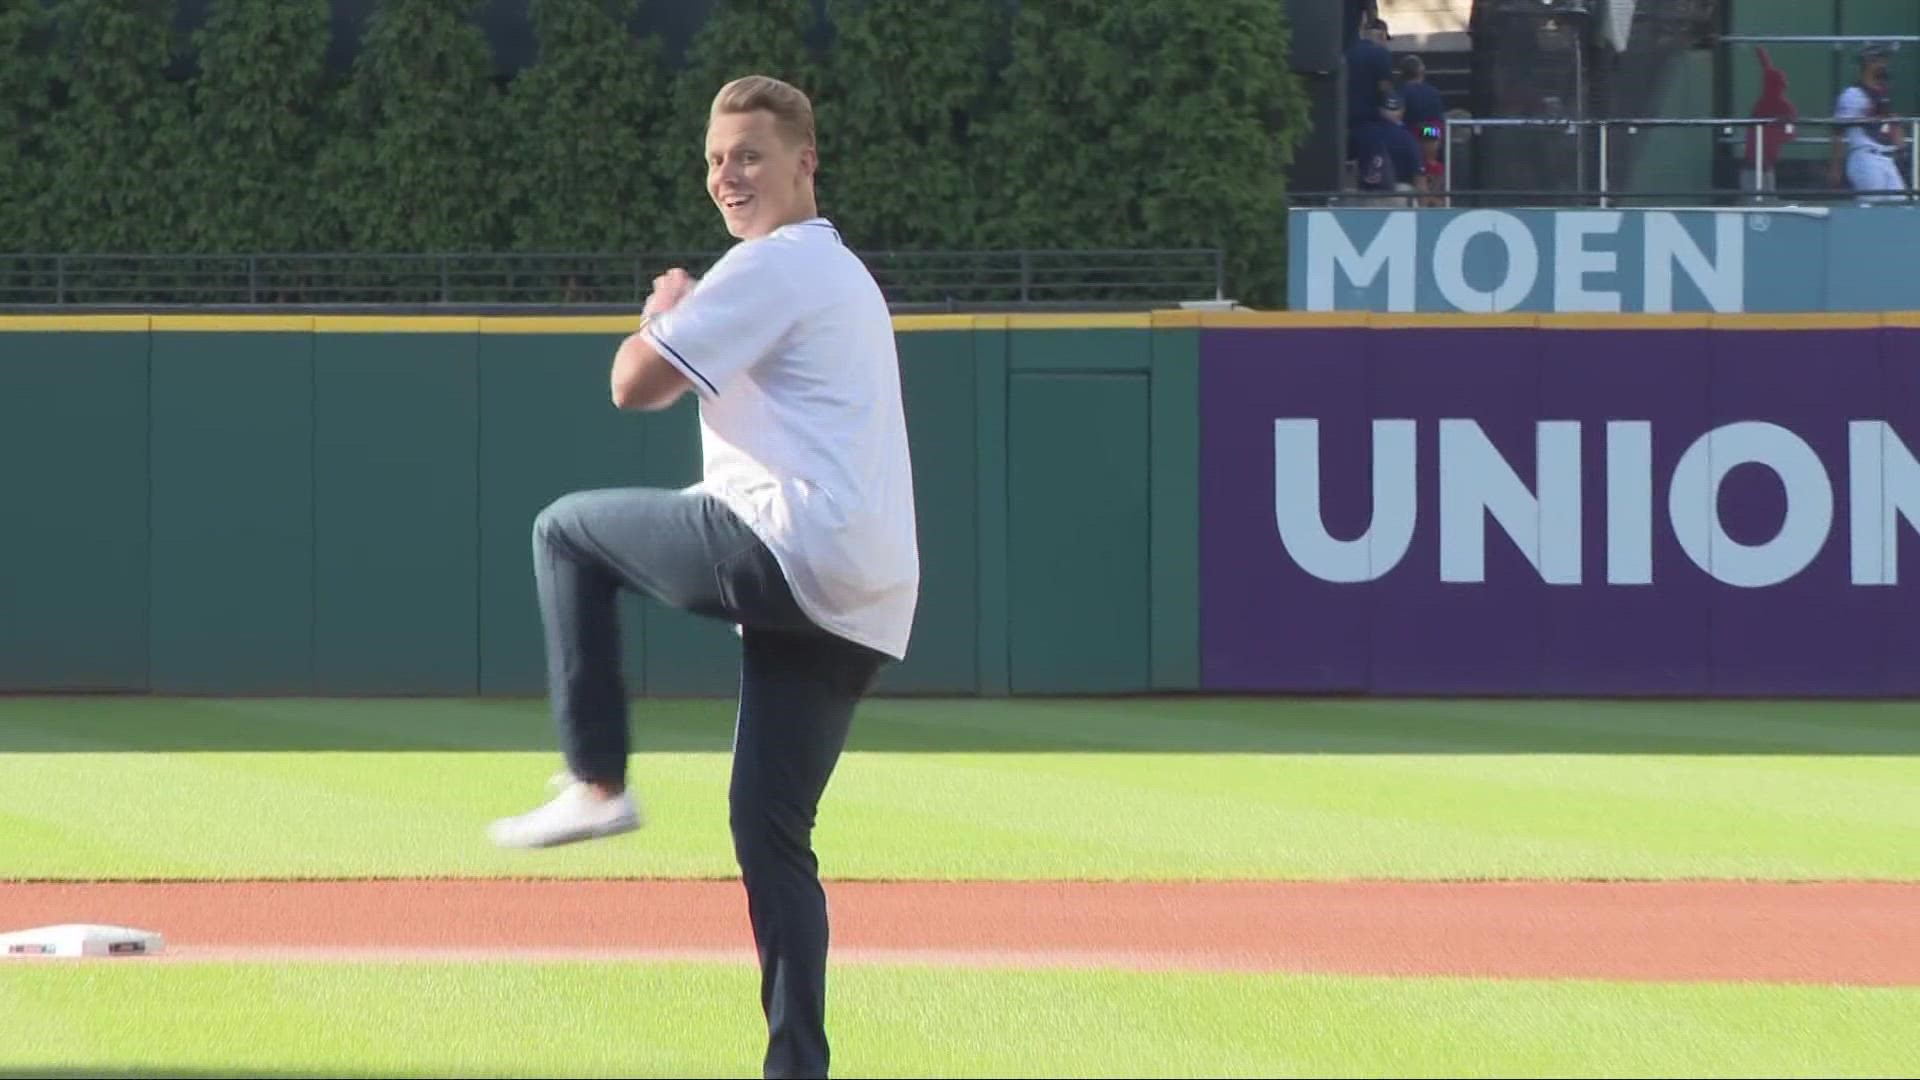 It was a big moment for our own Austin Love as he threw the ceremonial first pitch at a Cleveland Guardians game against the Minnesota Twins at Progressive Field.